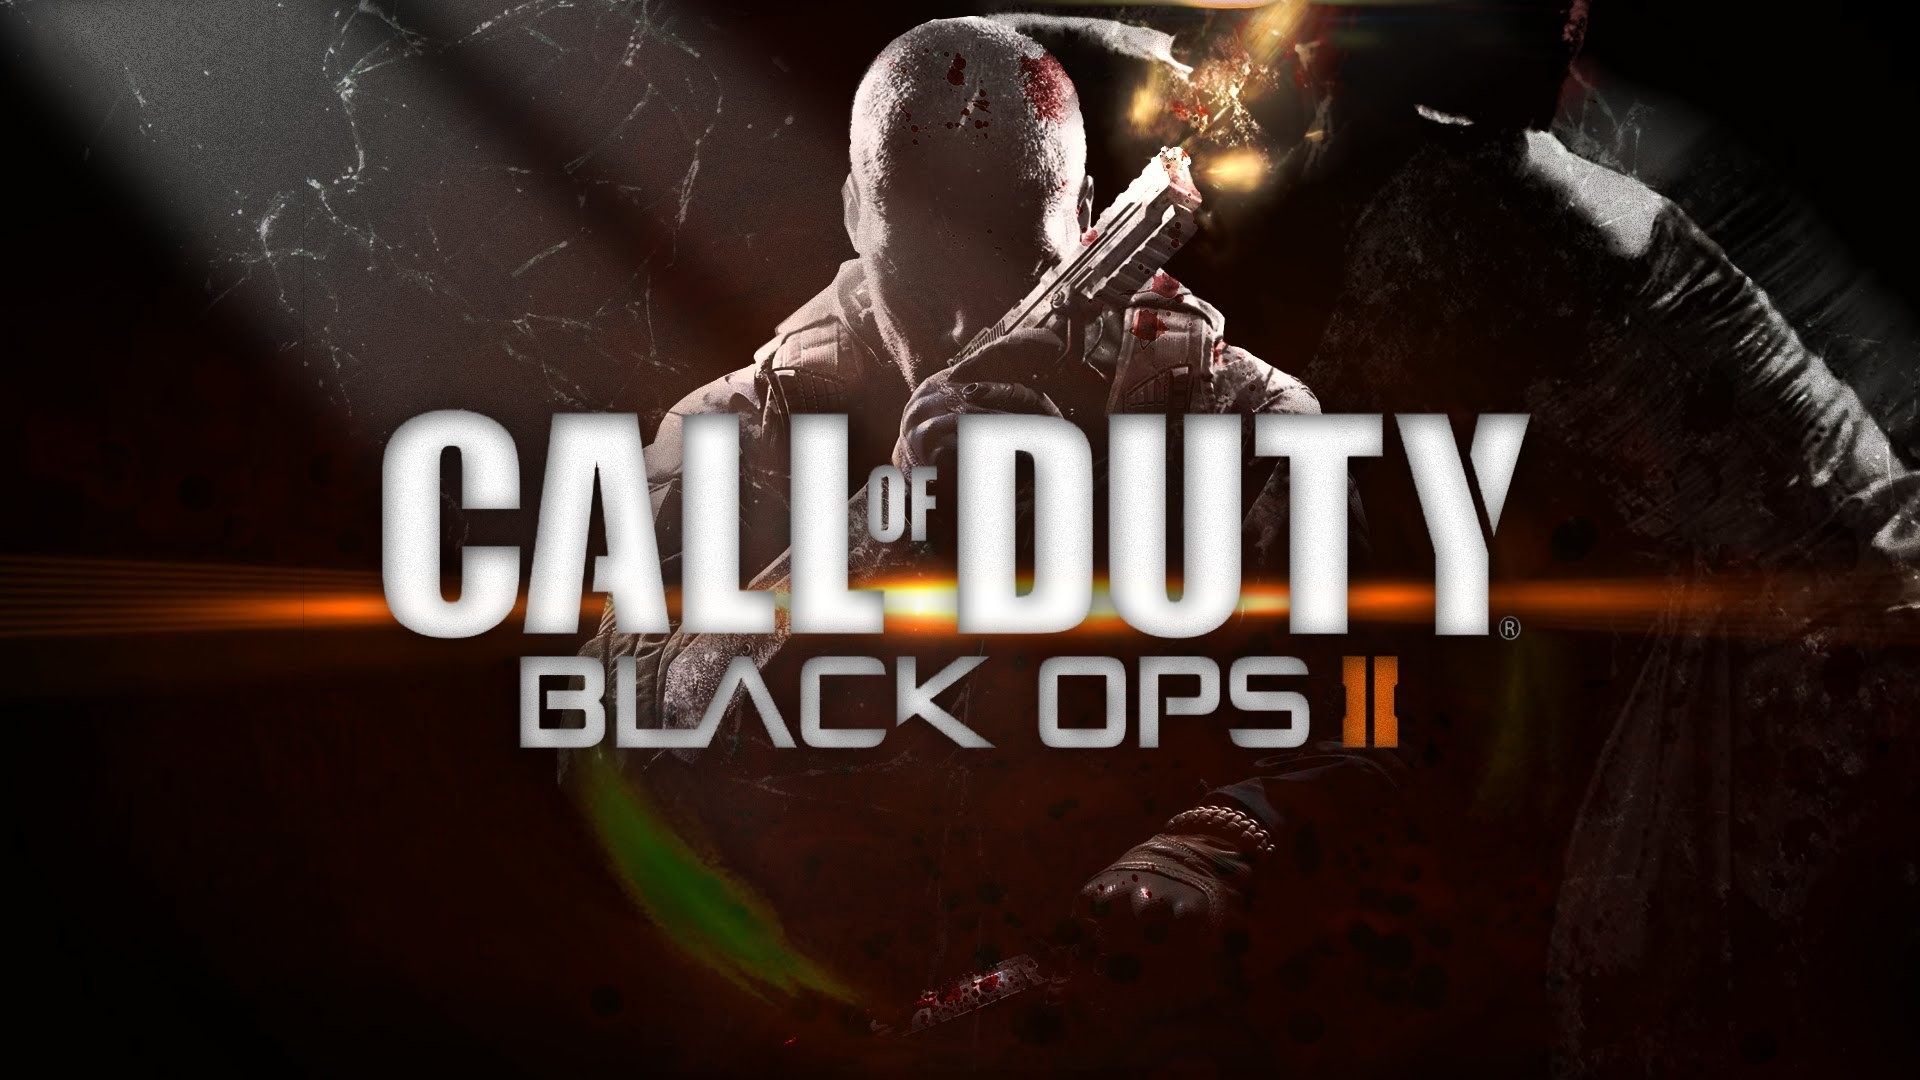 1920x1080 Call of Duty Black Ops 2 Zombies | Wallpaper Speed Art - YouTube